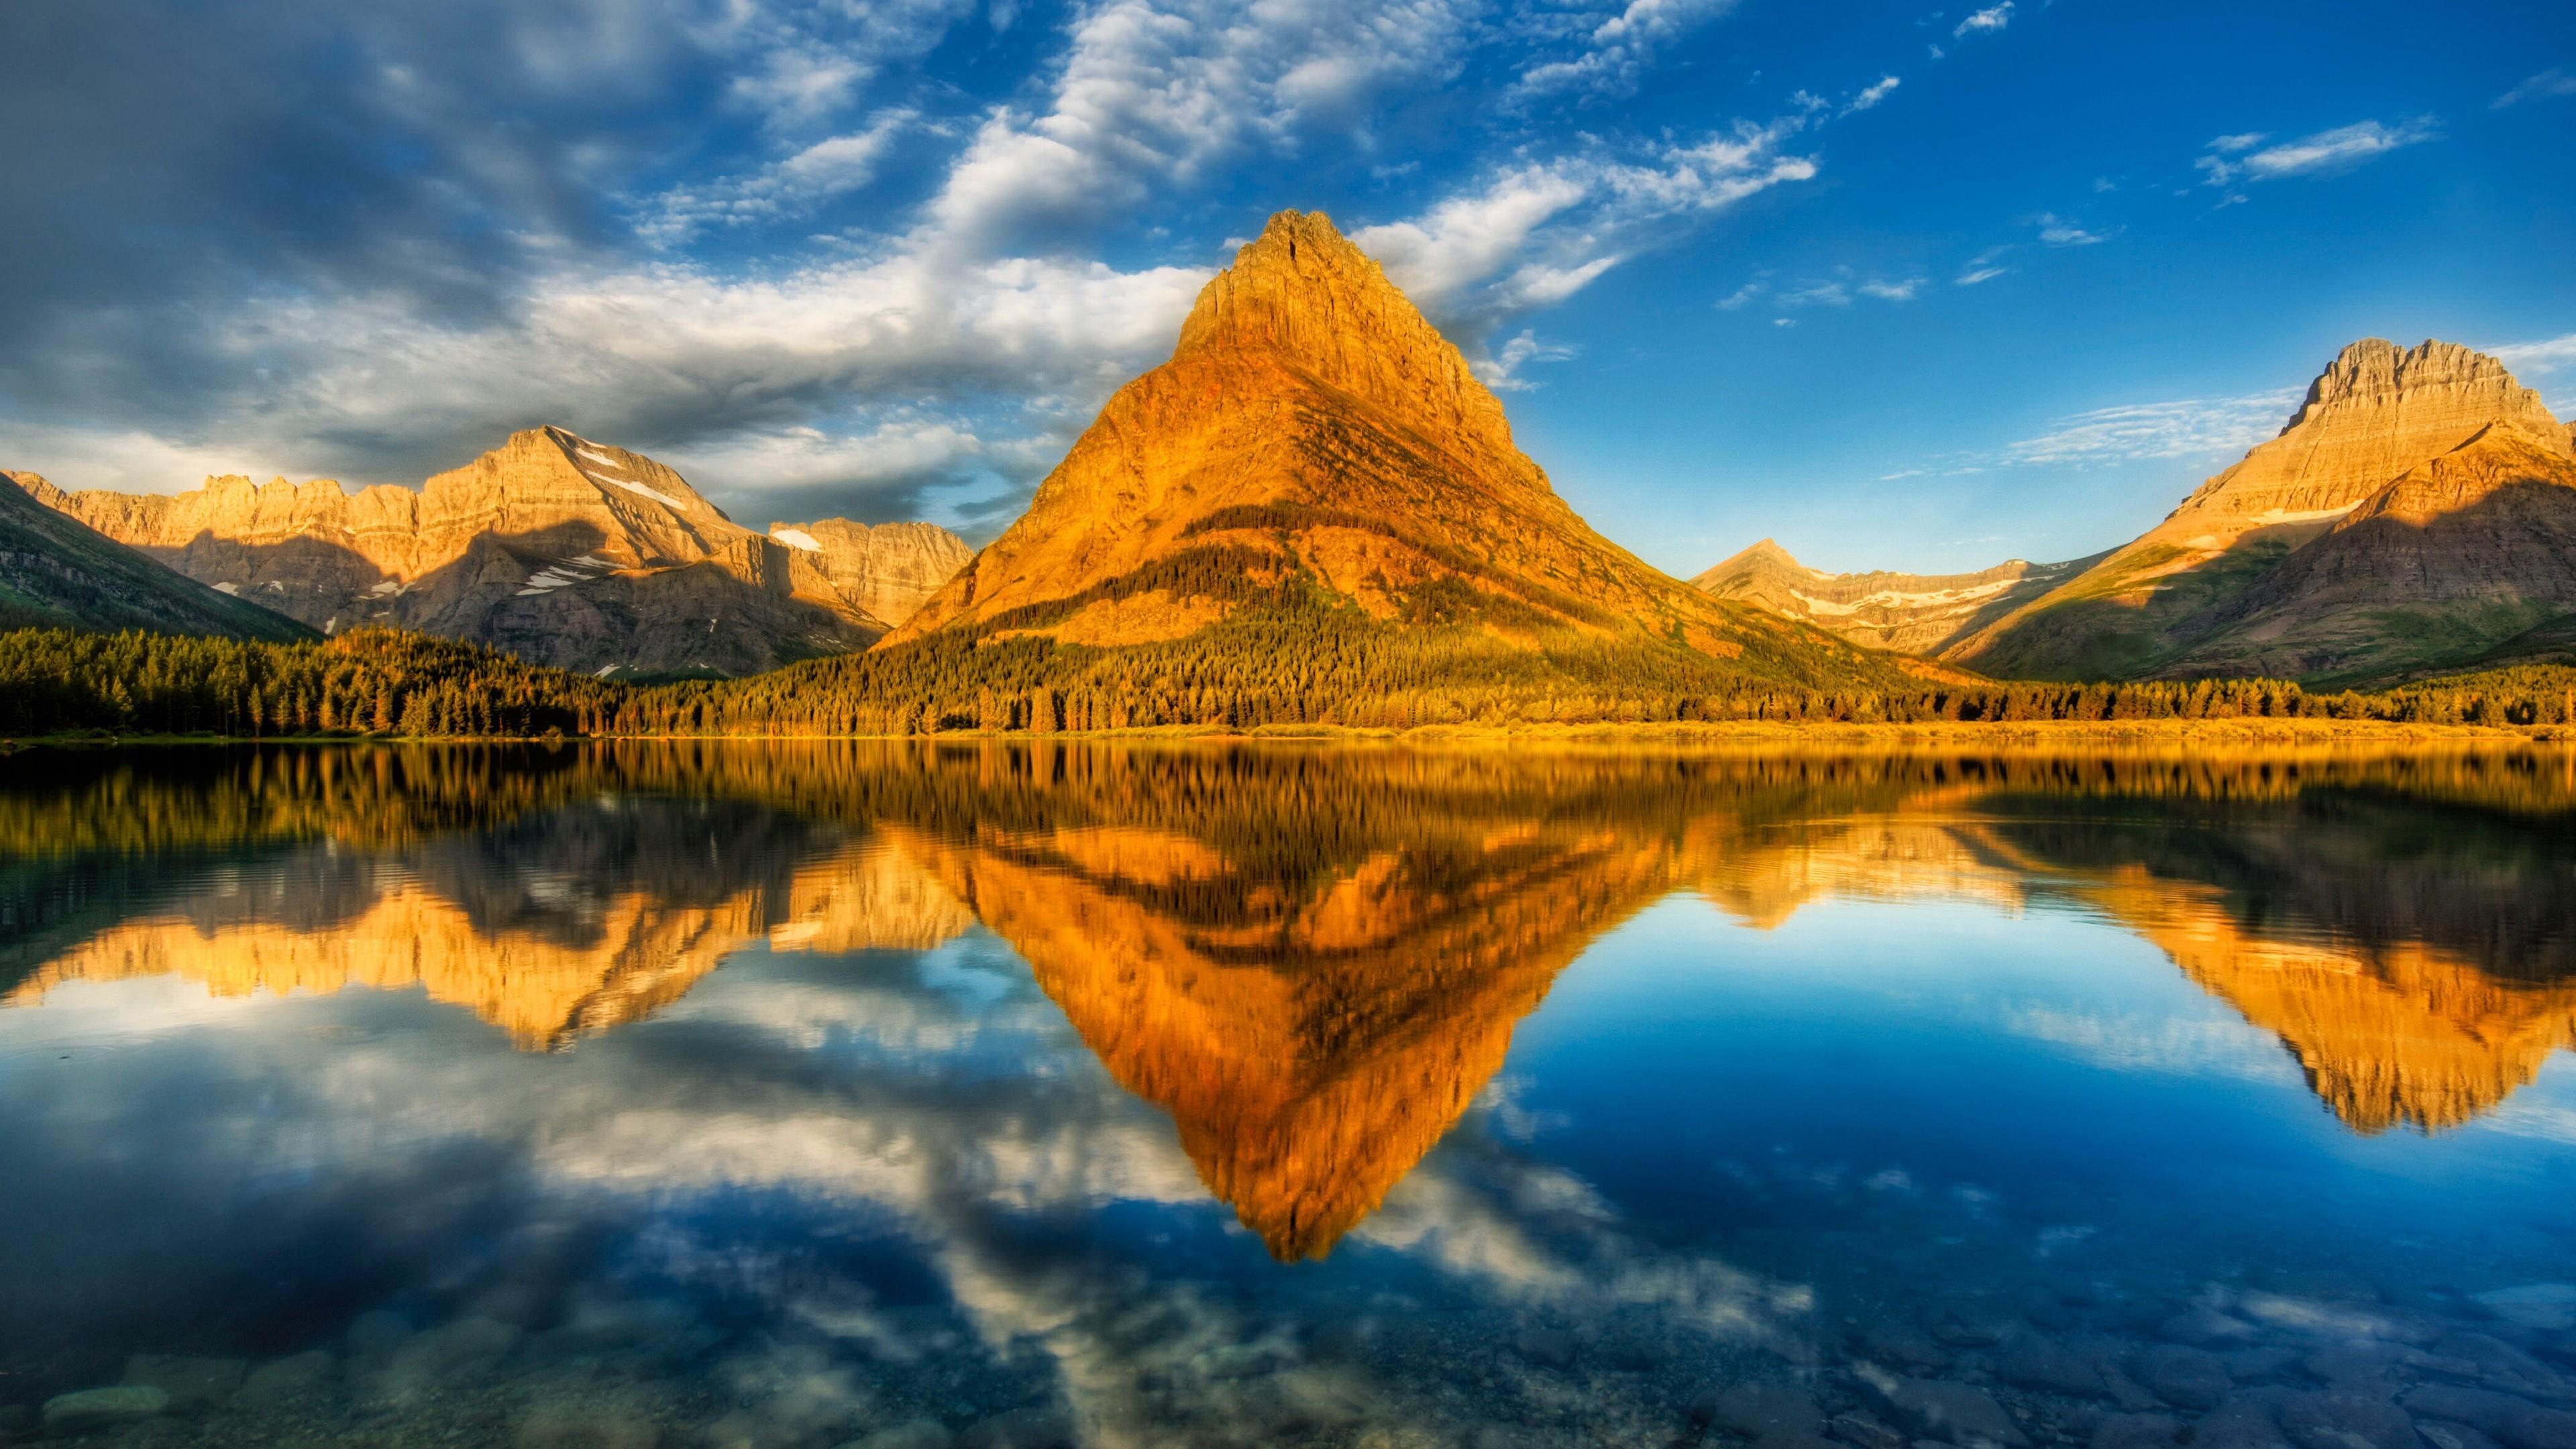 Mount Grinnell Montana 4K Wallpapers - Top Free Mount Grinnell Montana